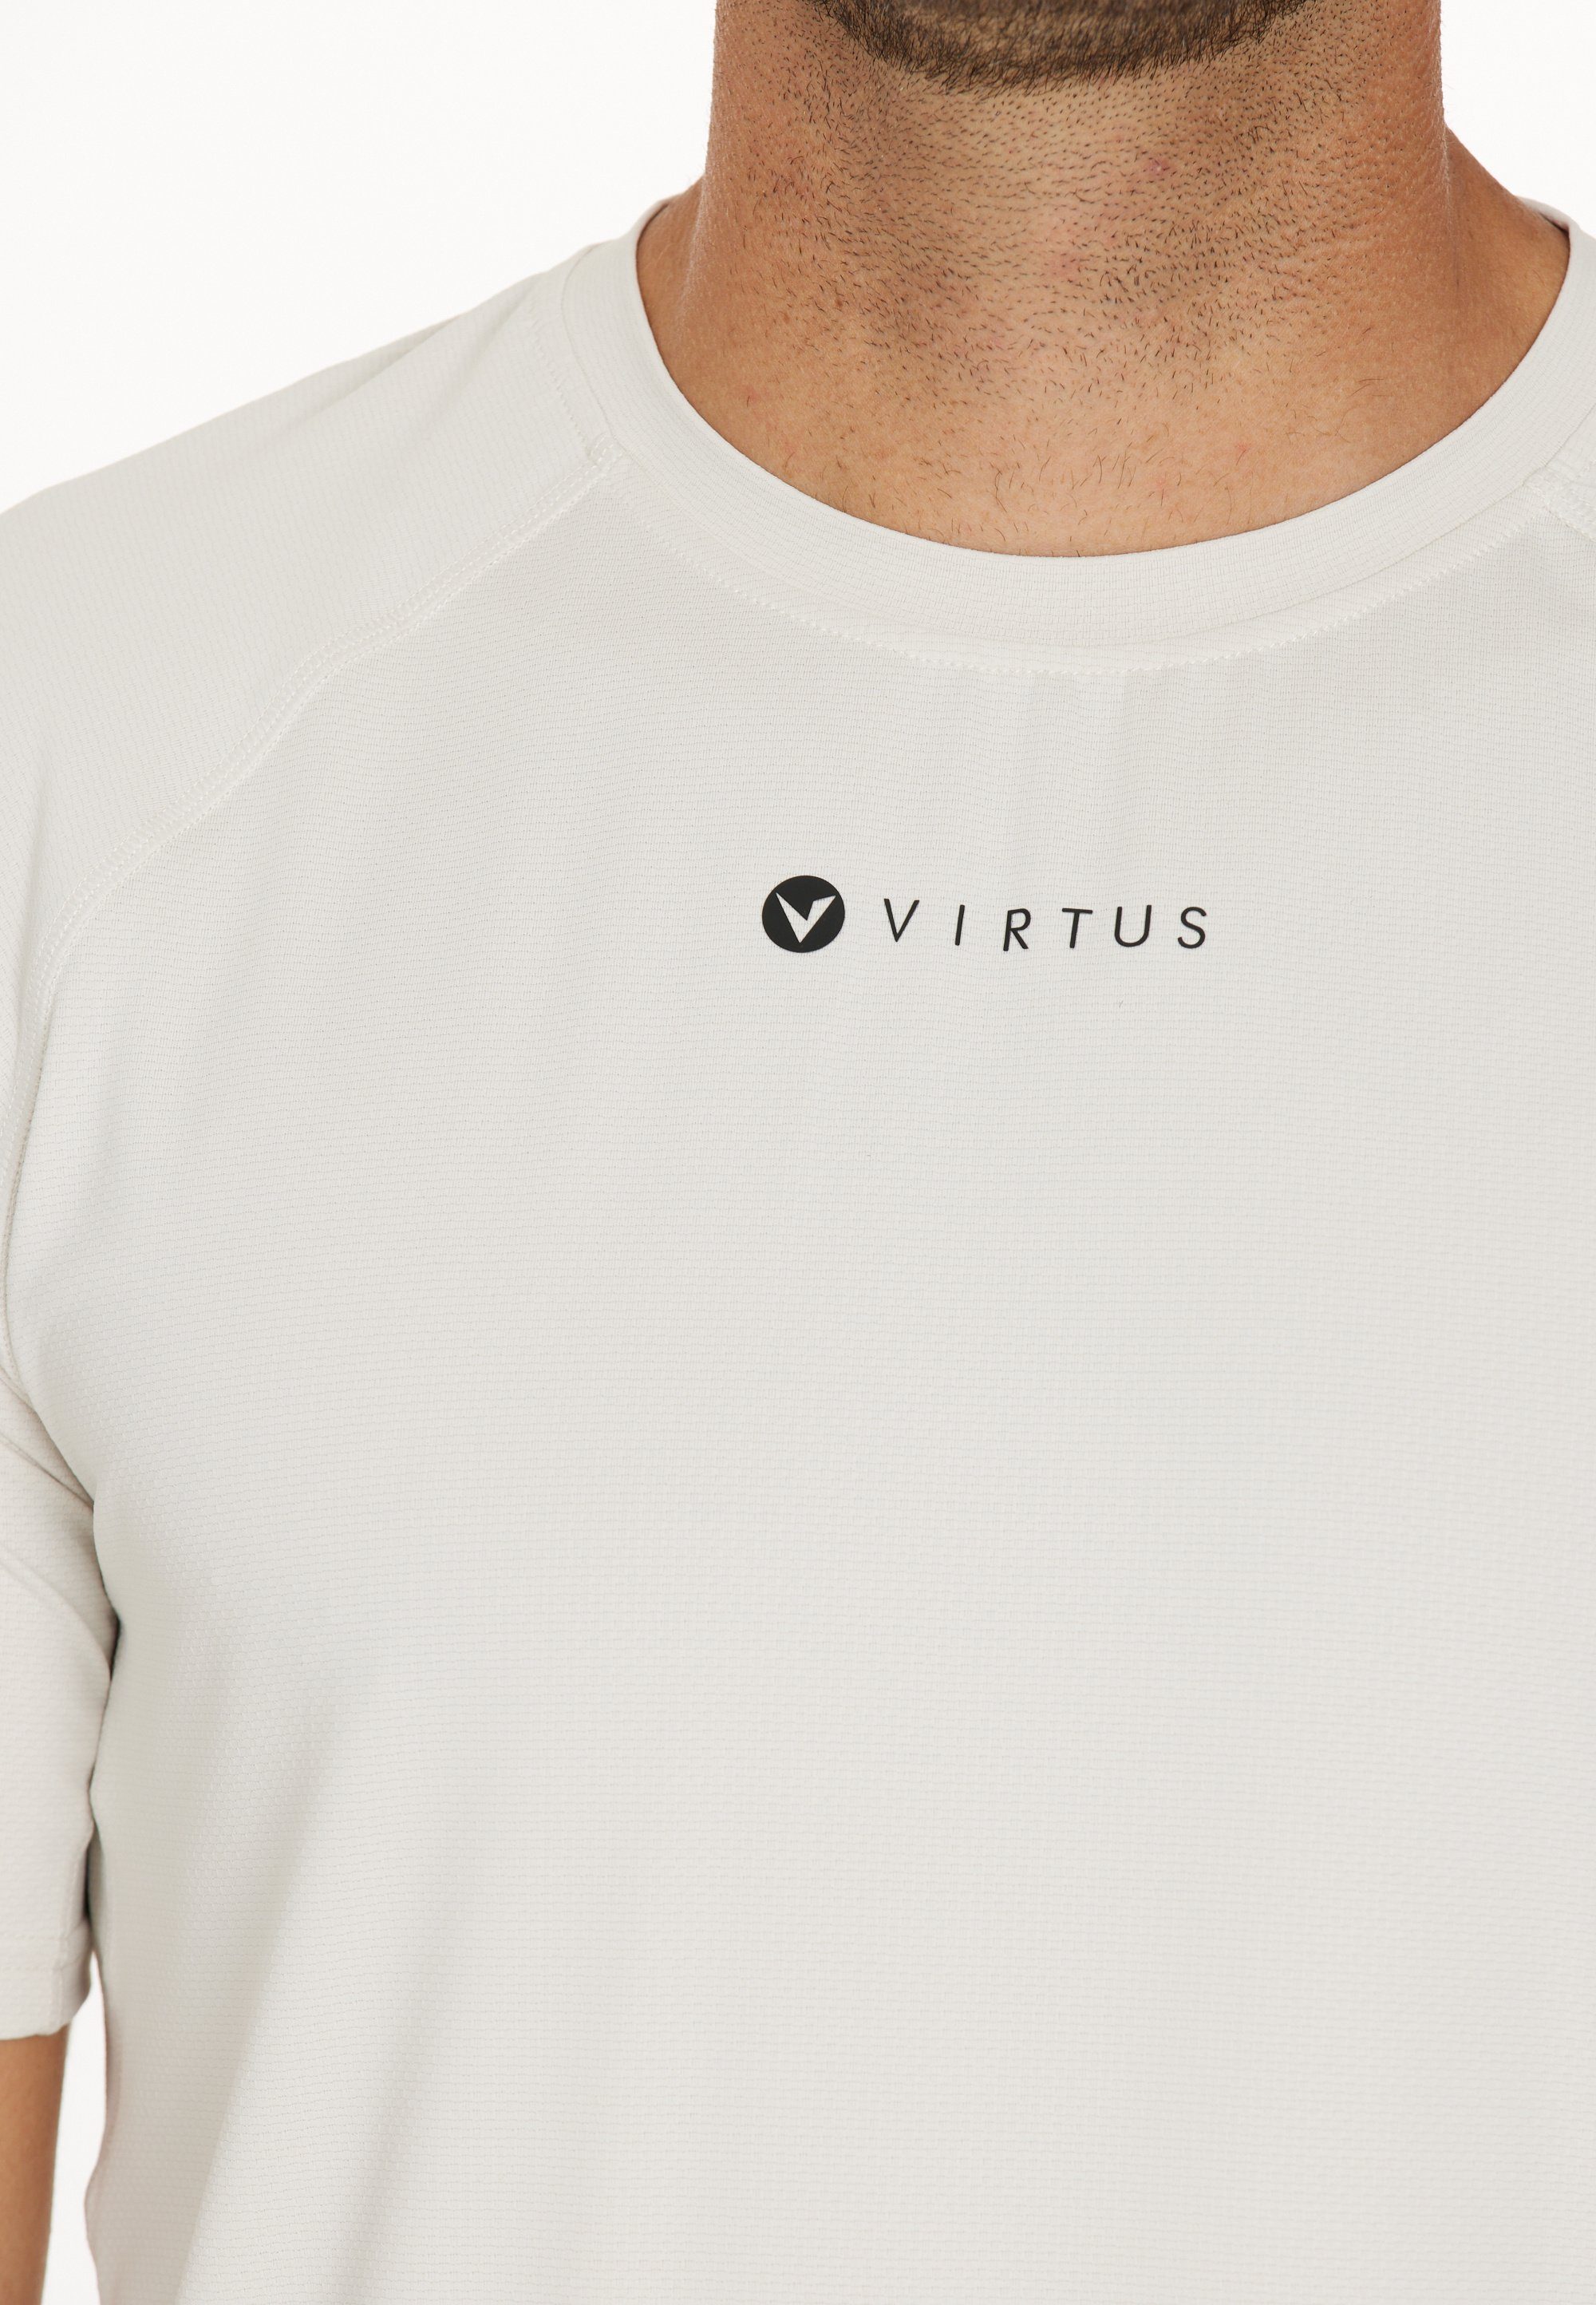 (1-tlg) mit Virtus Silver+-Technologie offwhite Toscan Muskelshirt